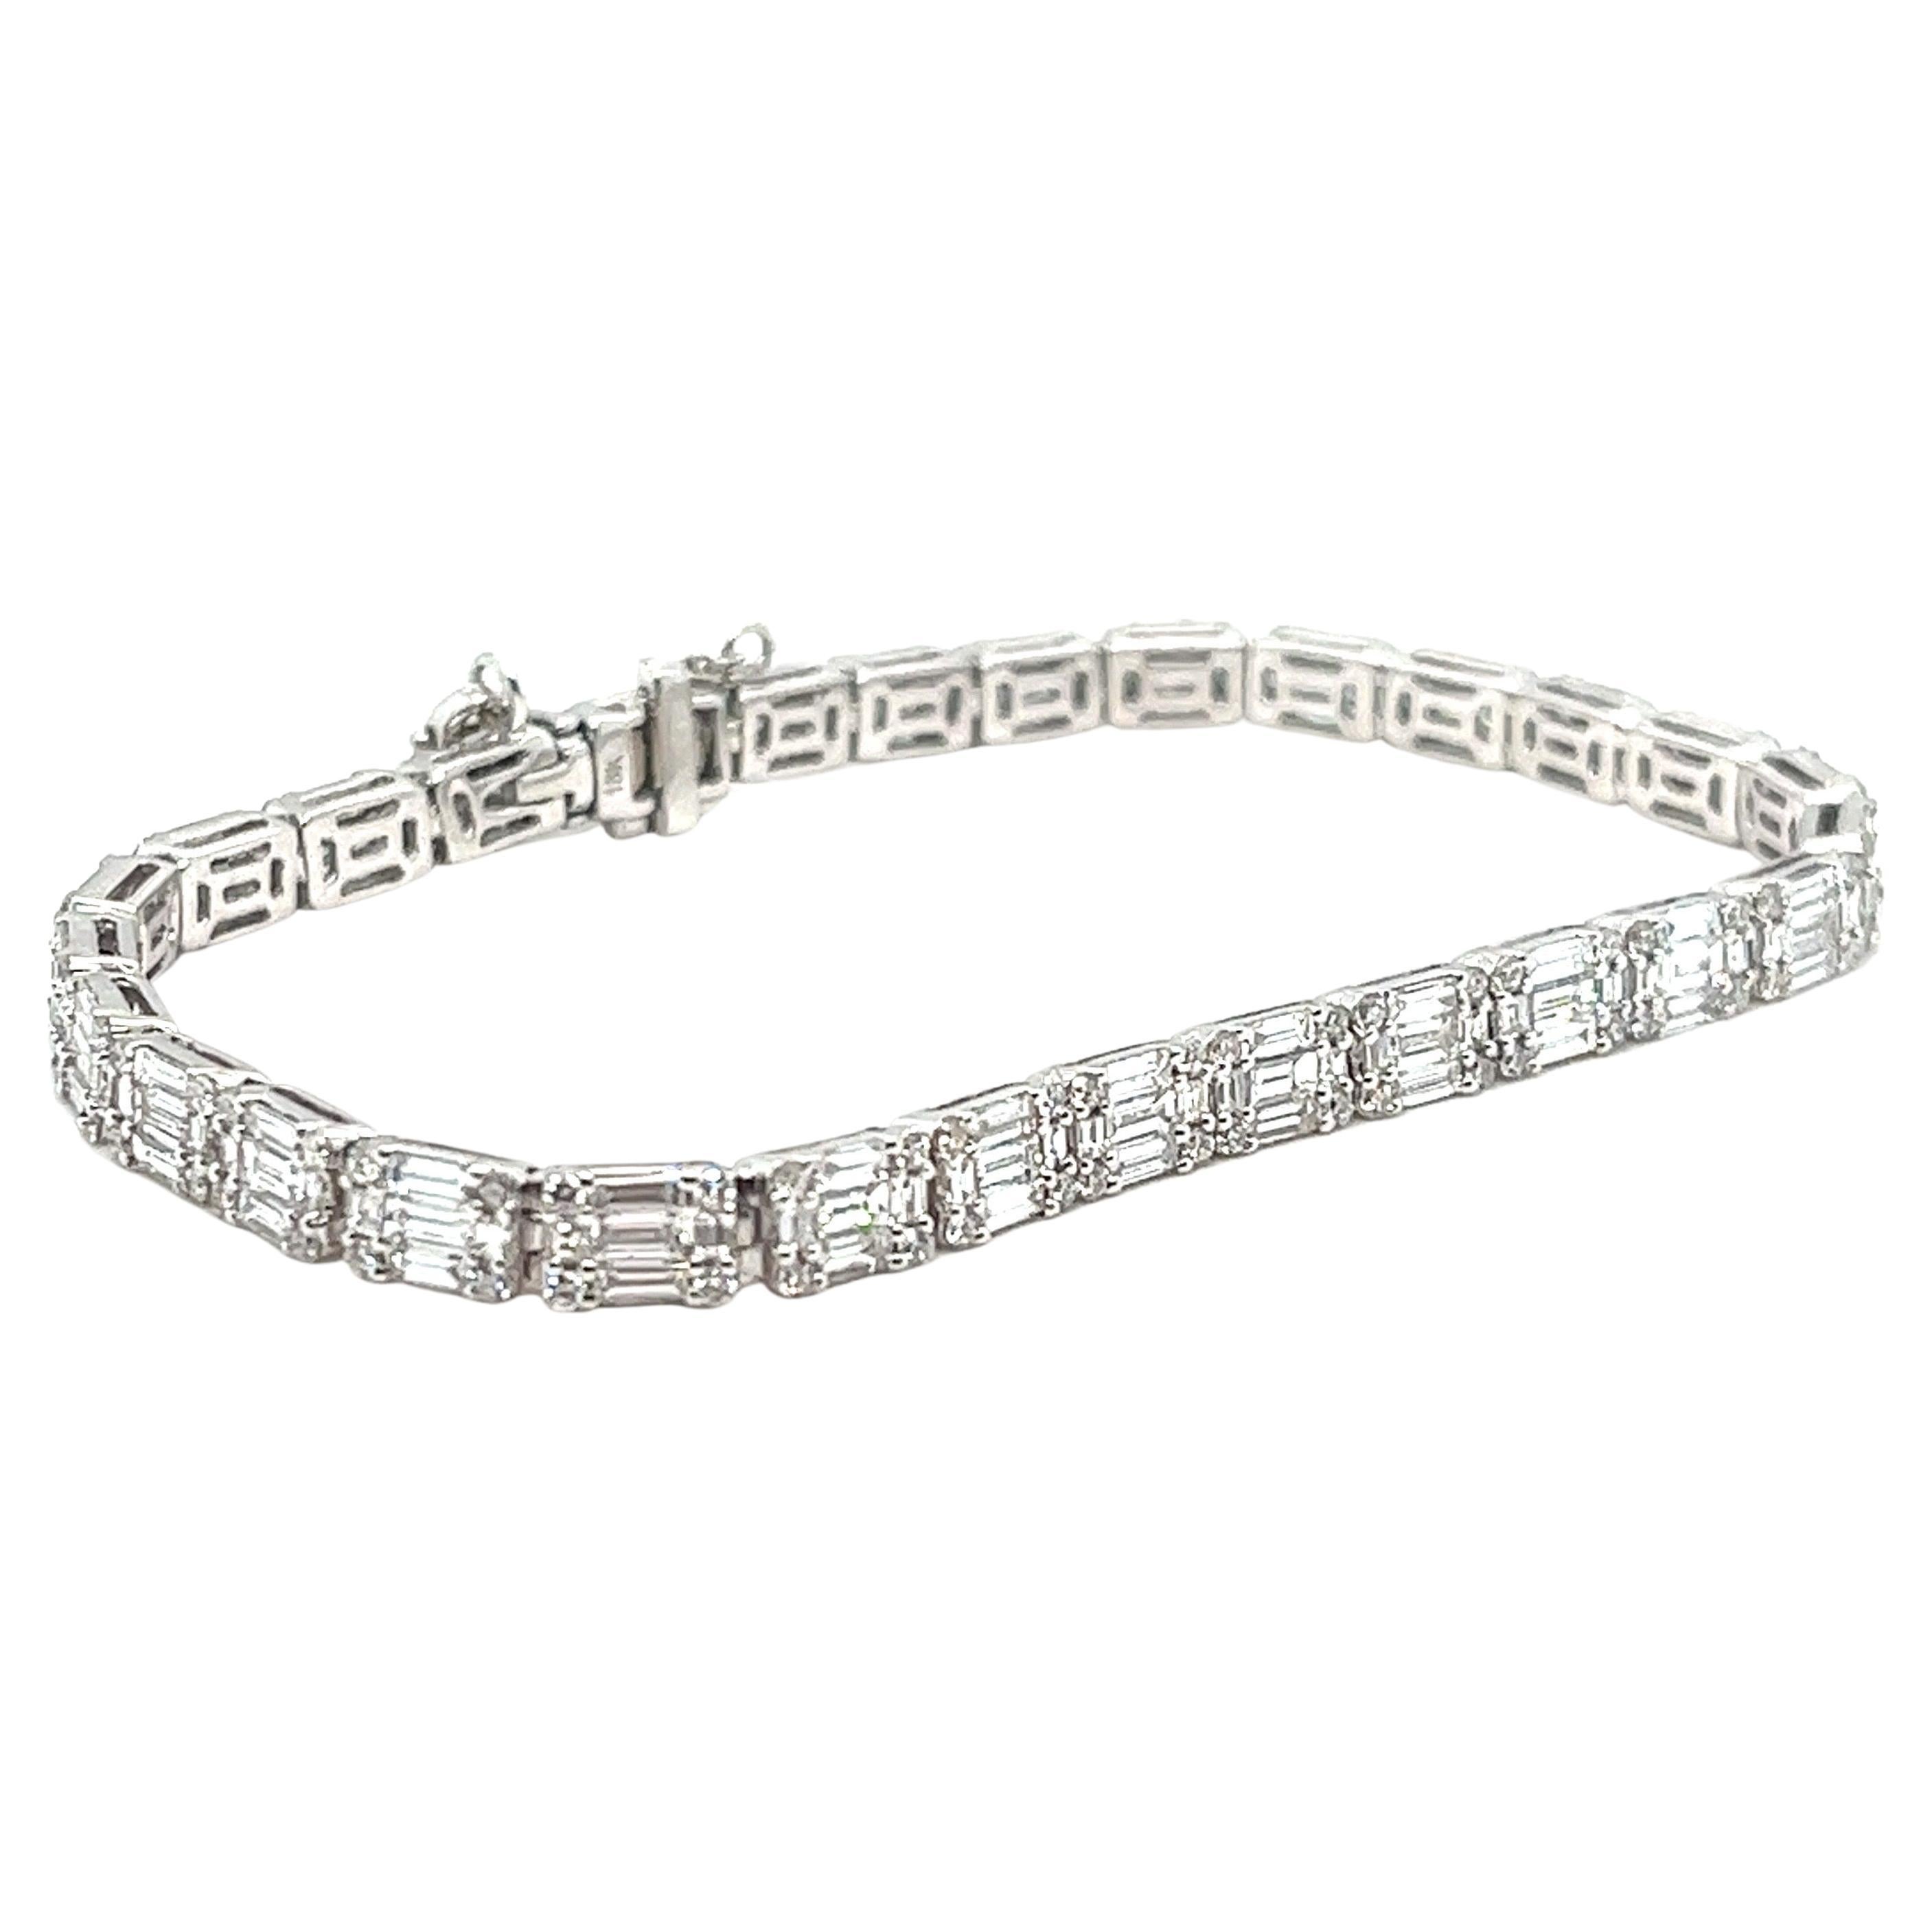 Exquisite 18kt White Gold Diamond Bracelet - Luxurious Elegance

Elevate your jewelry collection with the epitome of opulence and sophistication. This breathtaking 18kt white gold bracelet is a masterpiece of craftsmanship, adorned with a